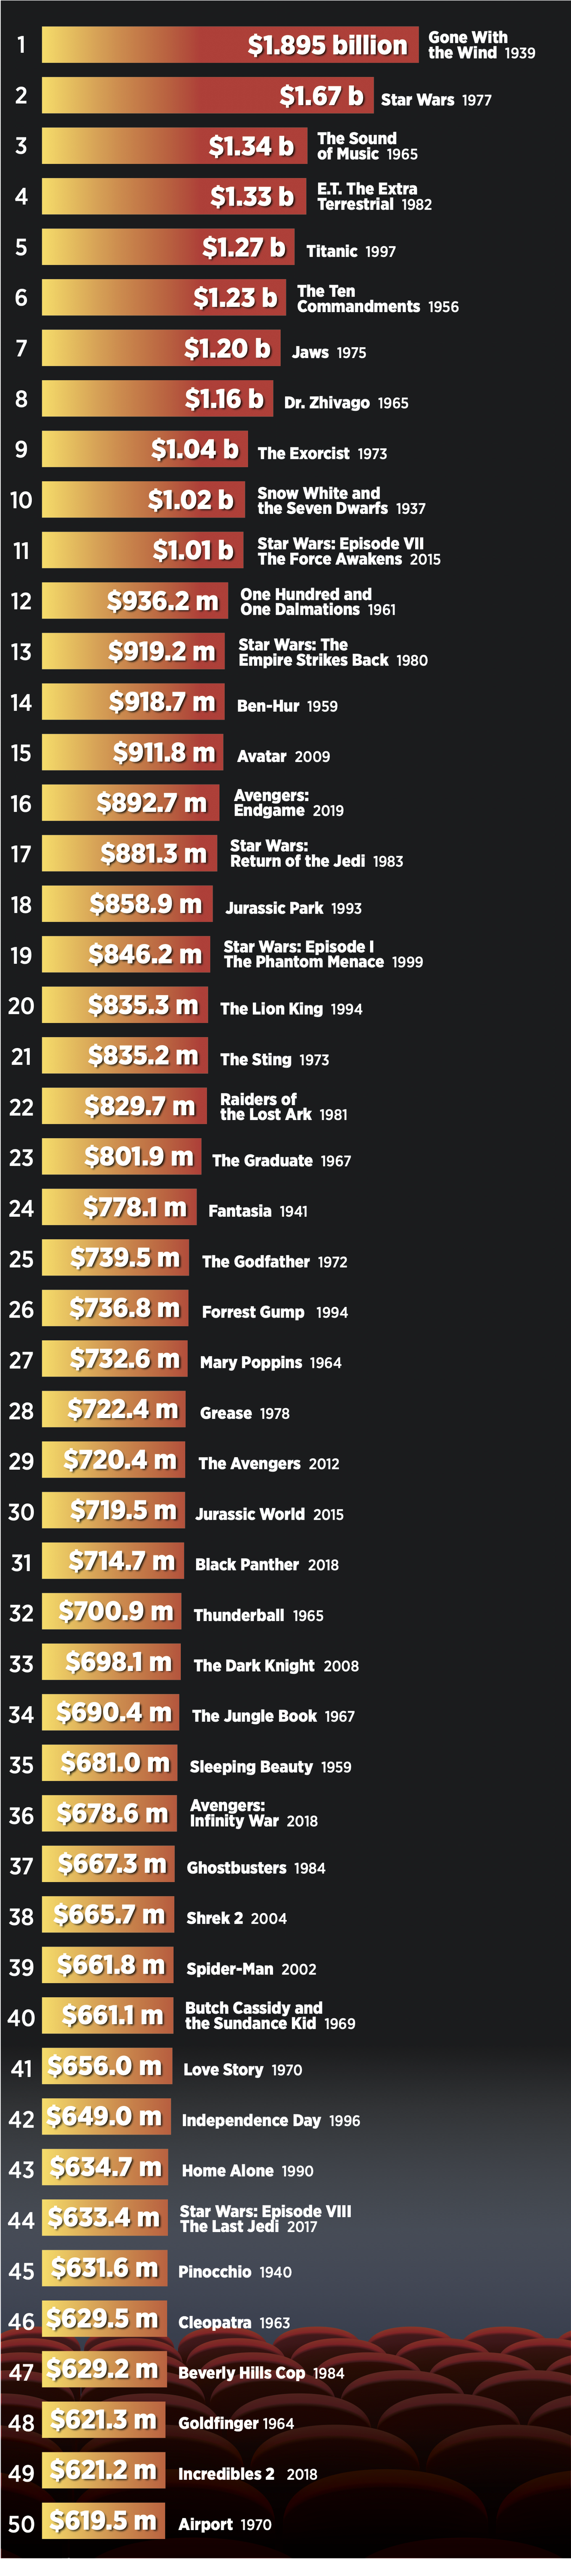 best-selling movies of all time, inflation | The Spokesman-Review